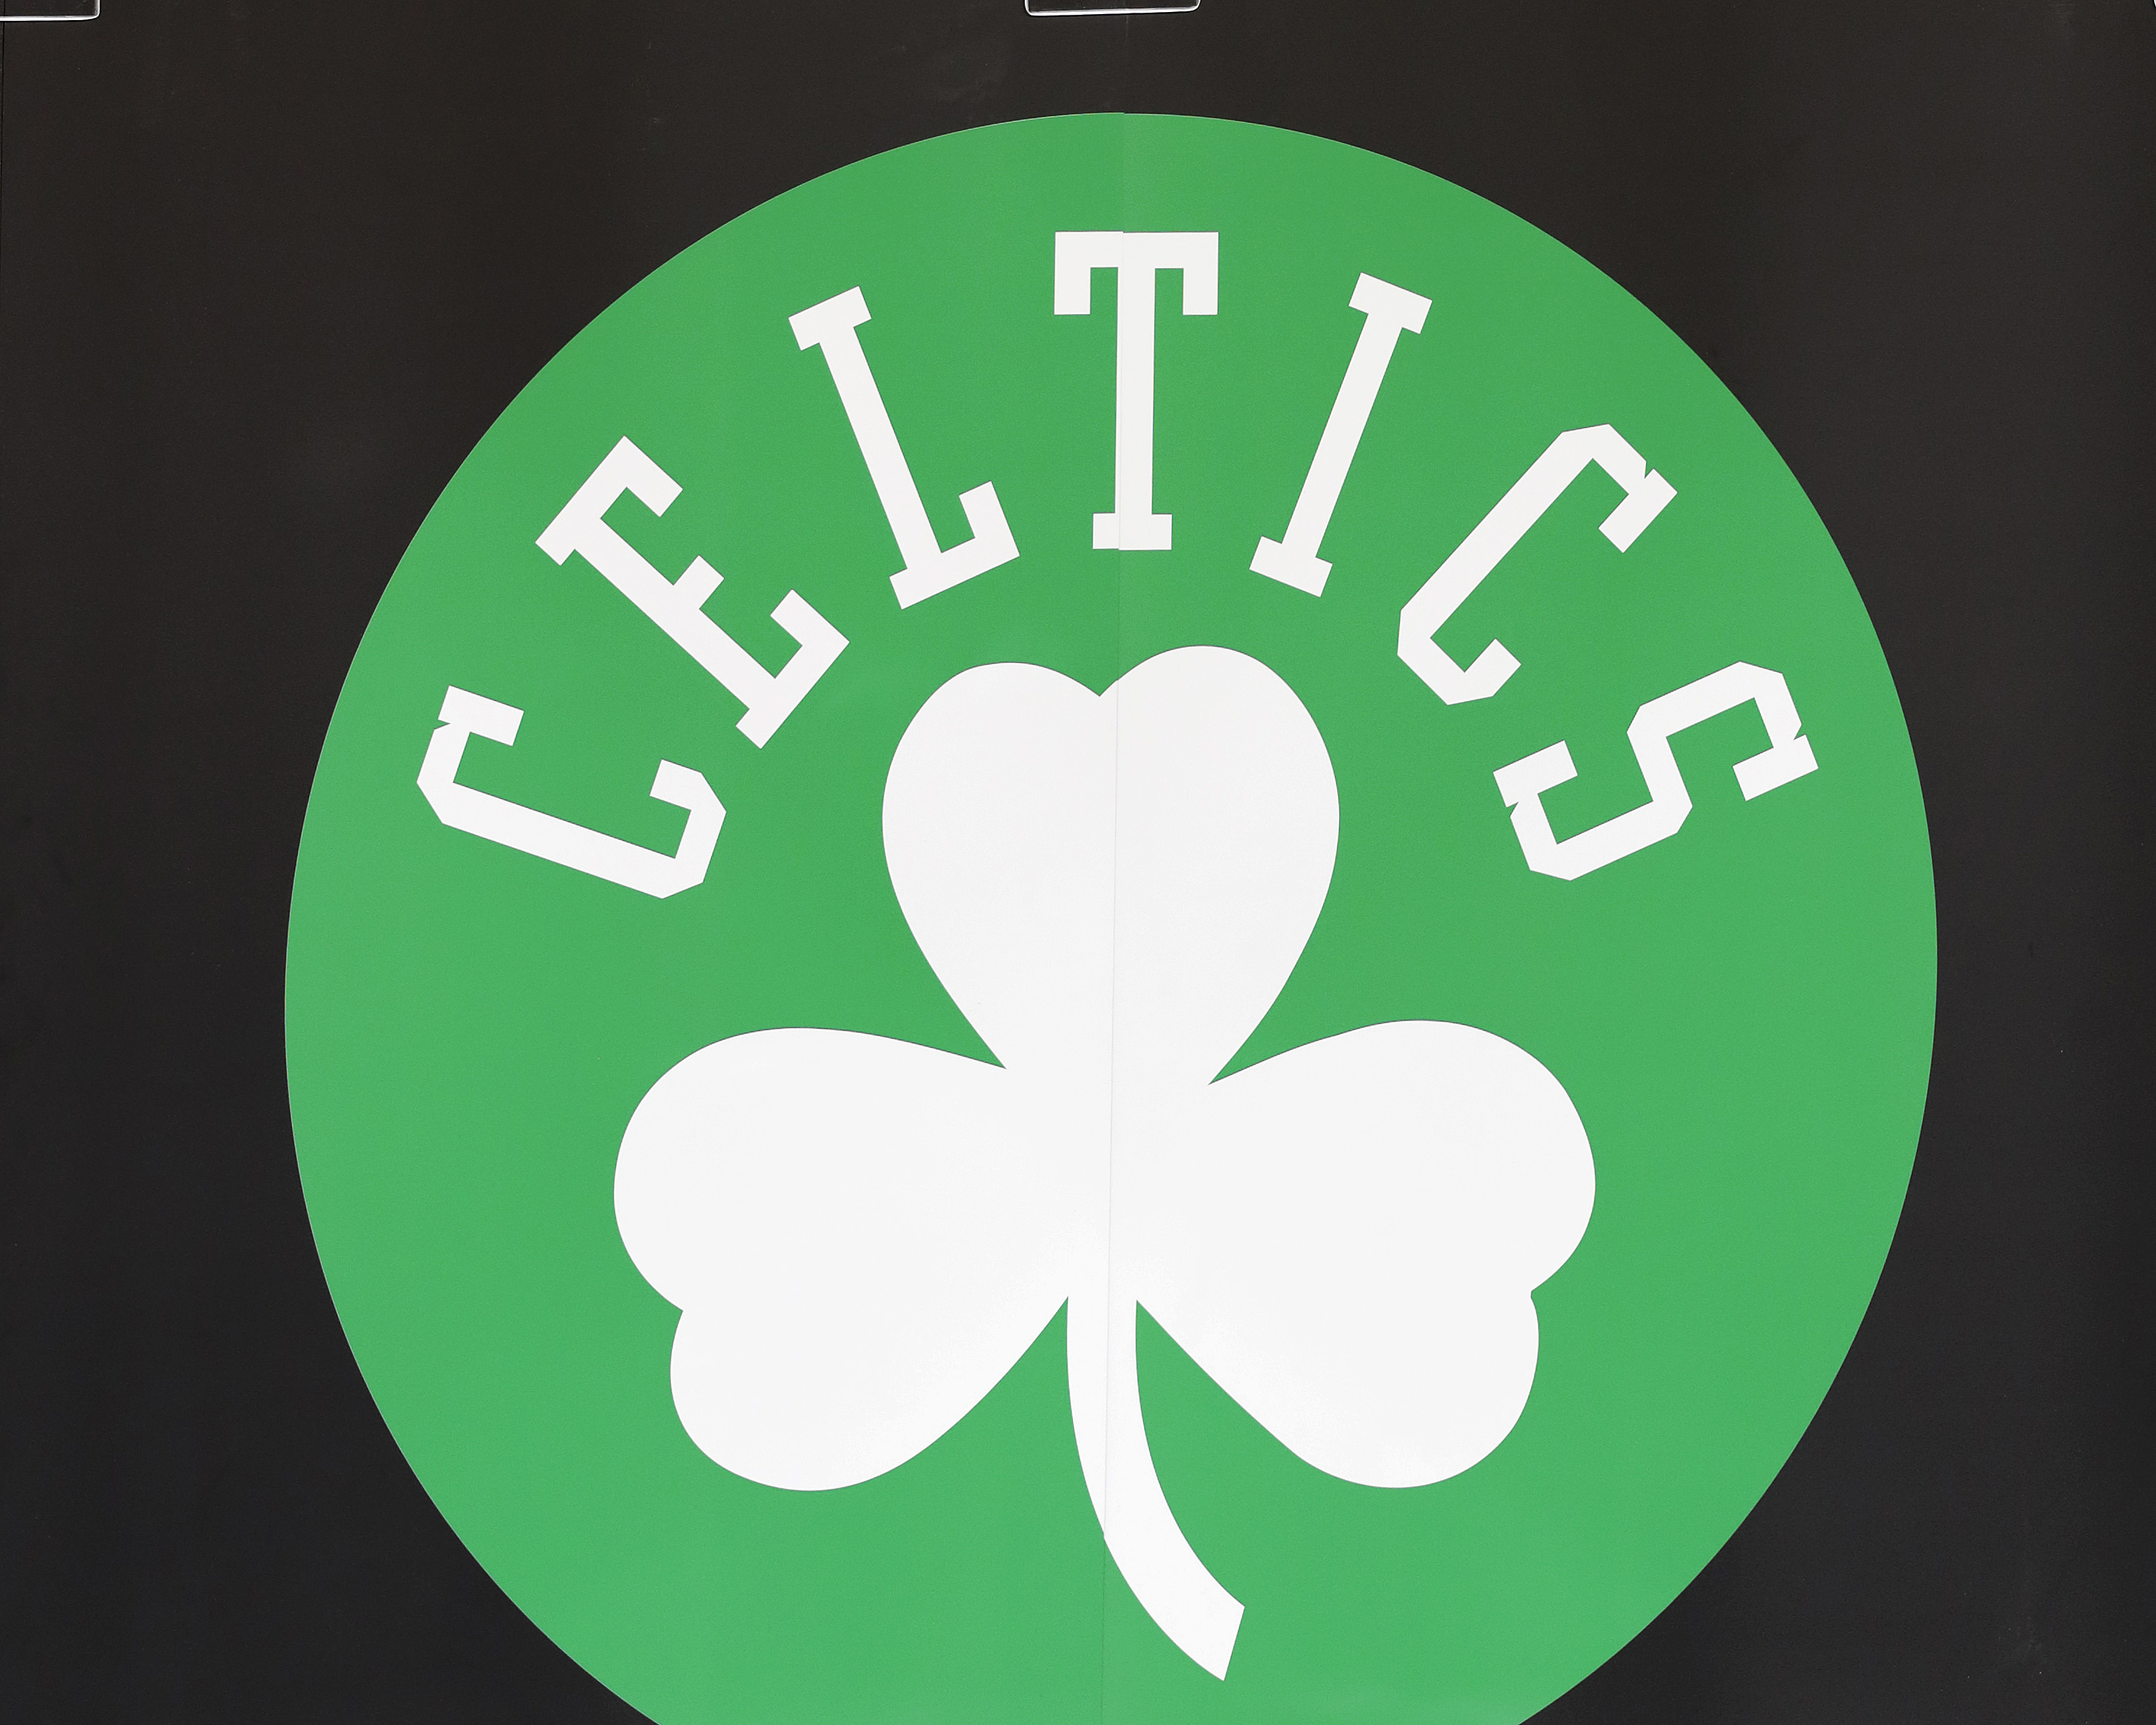 The Boston Celtics logo on the boards before the game between the Boston Celtics and the Brooklyn Nets.